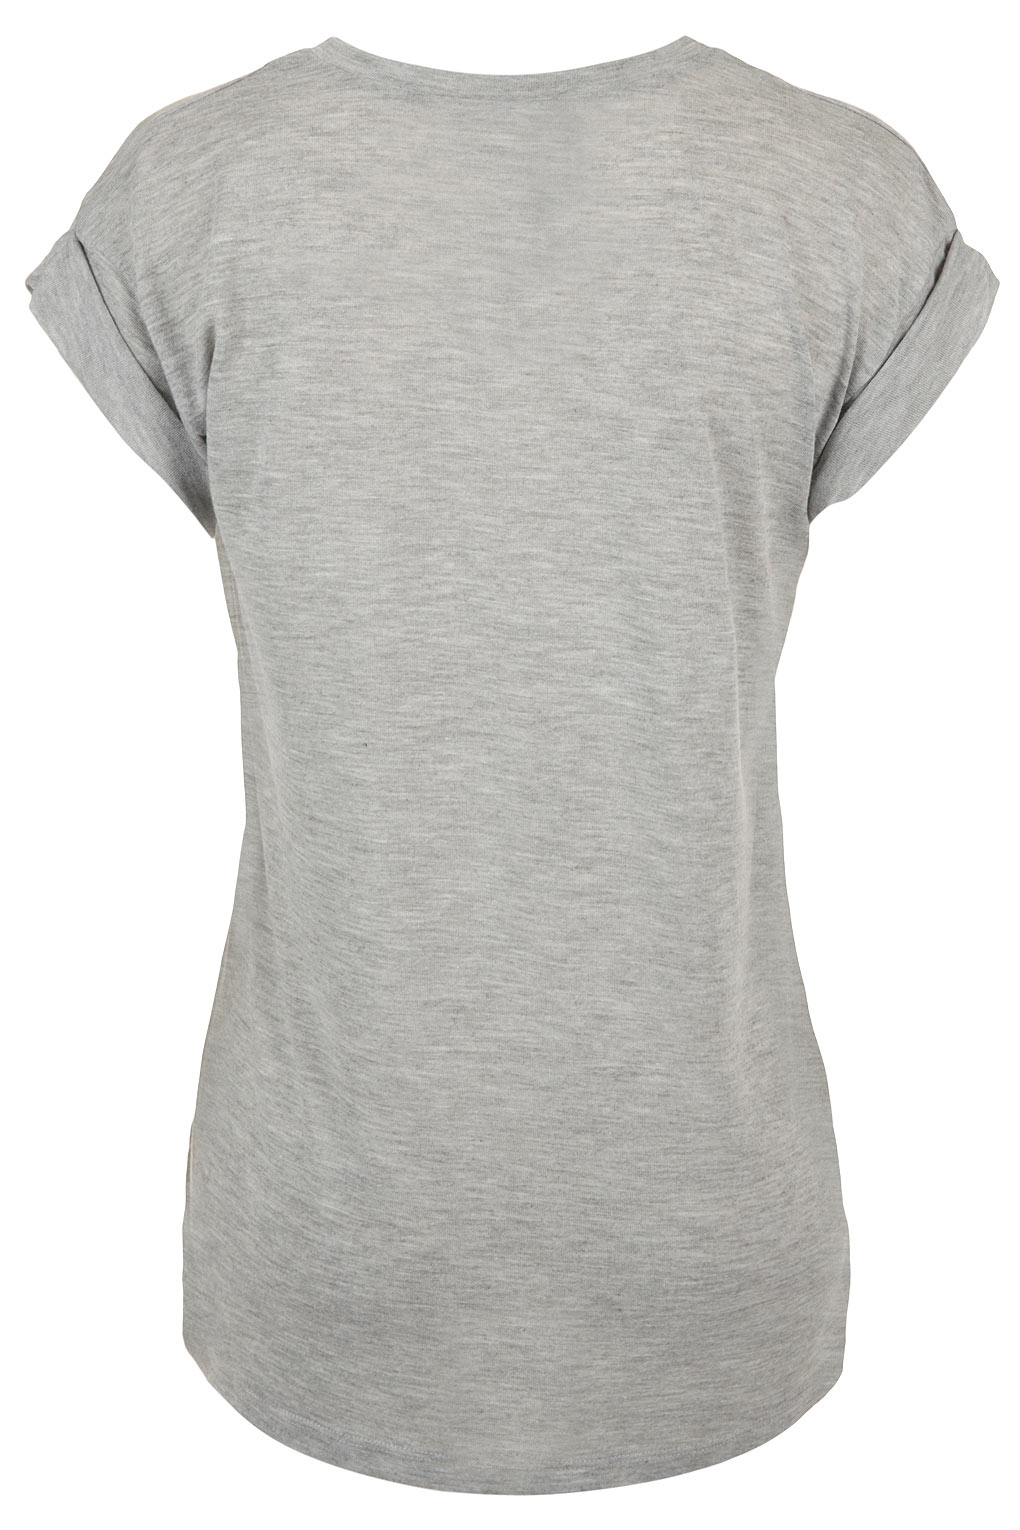 TOPSHOP Kings Of Leon Tee By and Finally in Grey Marl (Grey) - Lyst